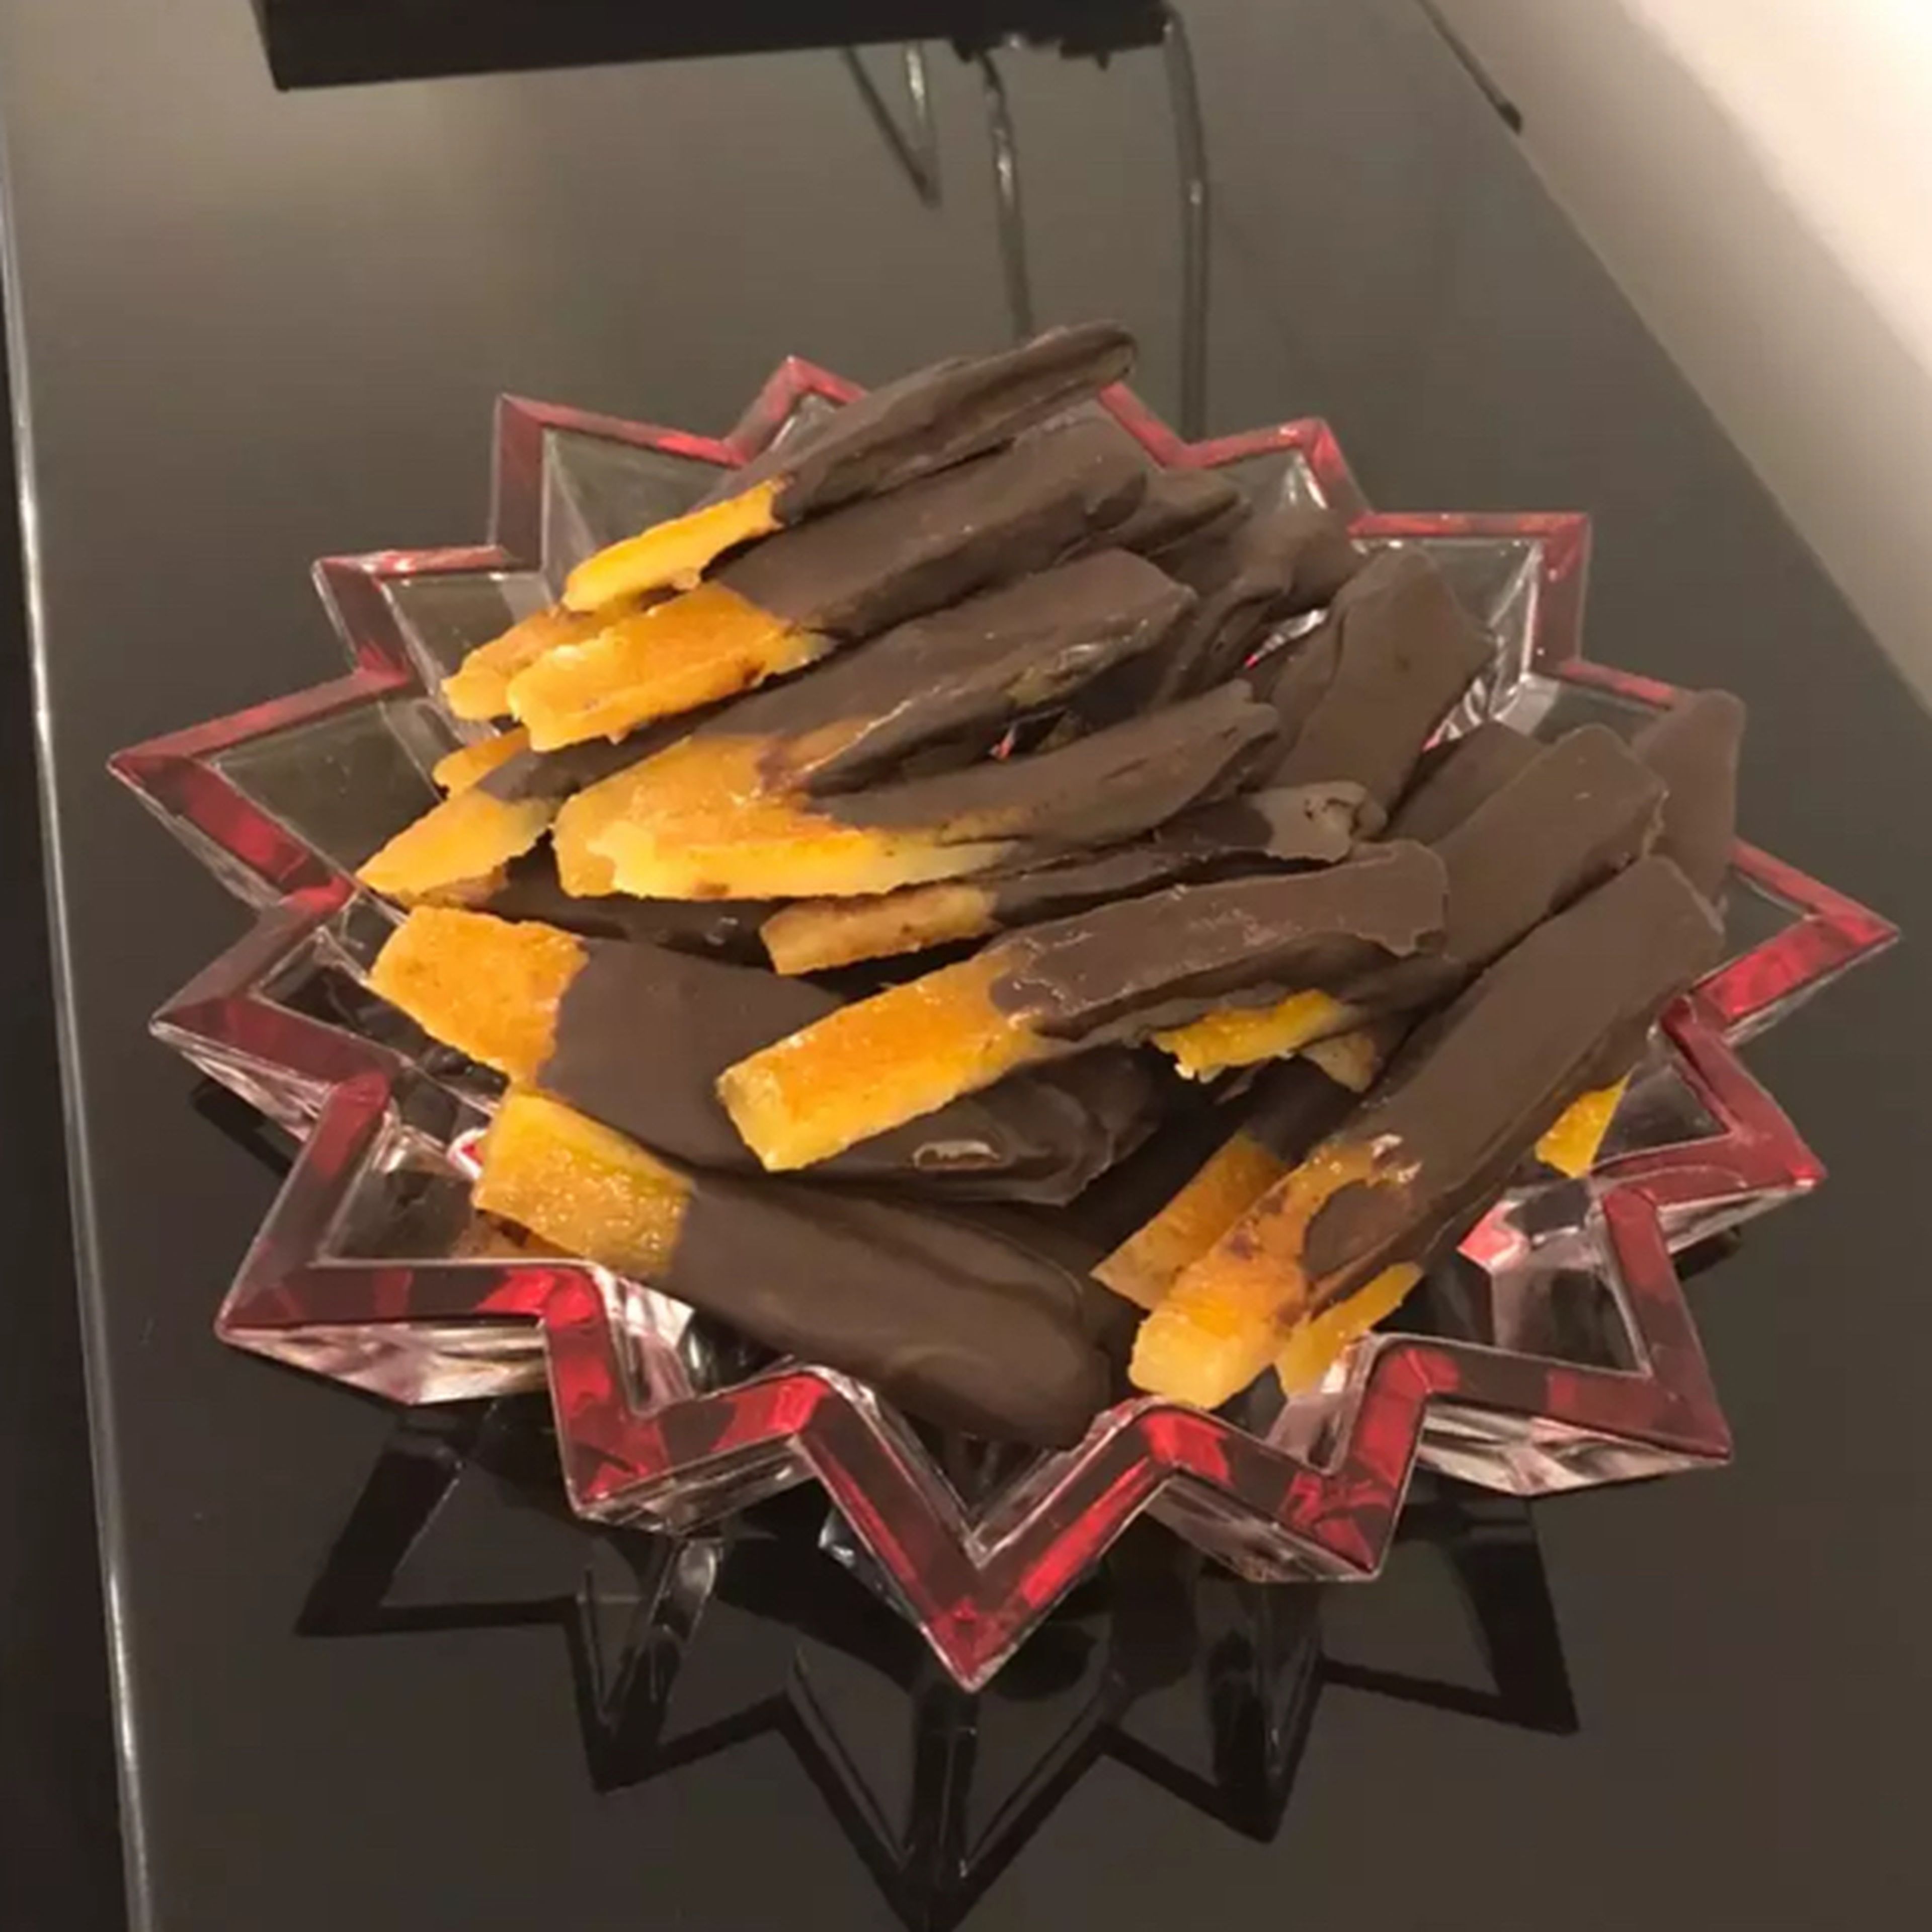 Now we separate the chocolates from the paper and put them in a chocolate dish. I think it tastes unique. Try and enjoy.